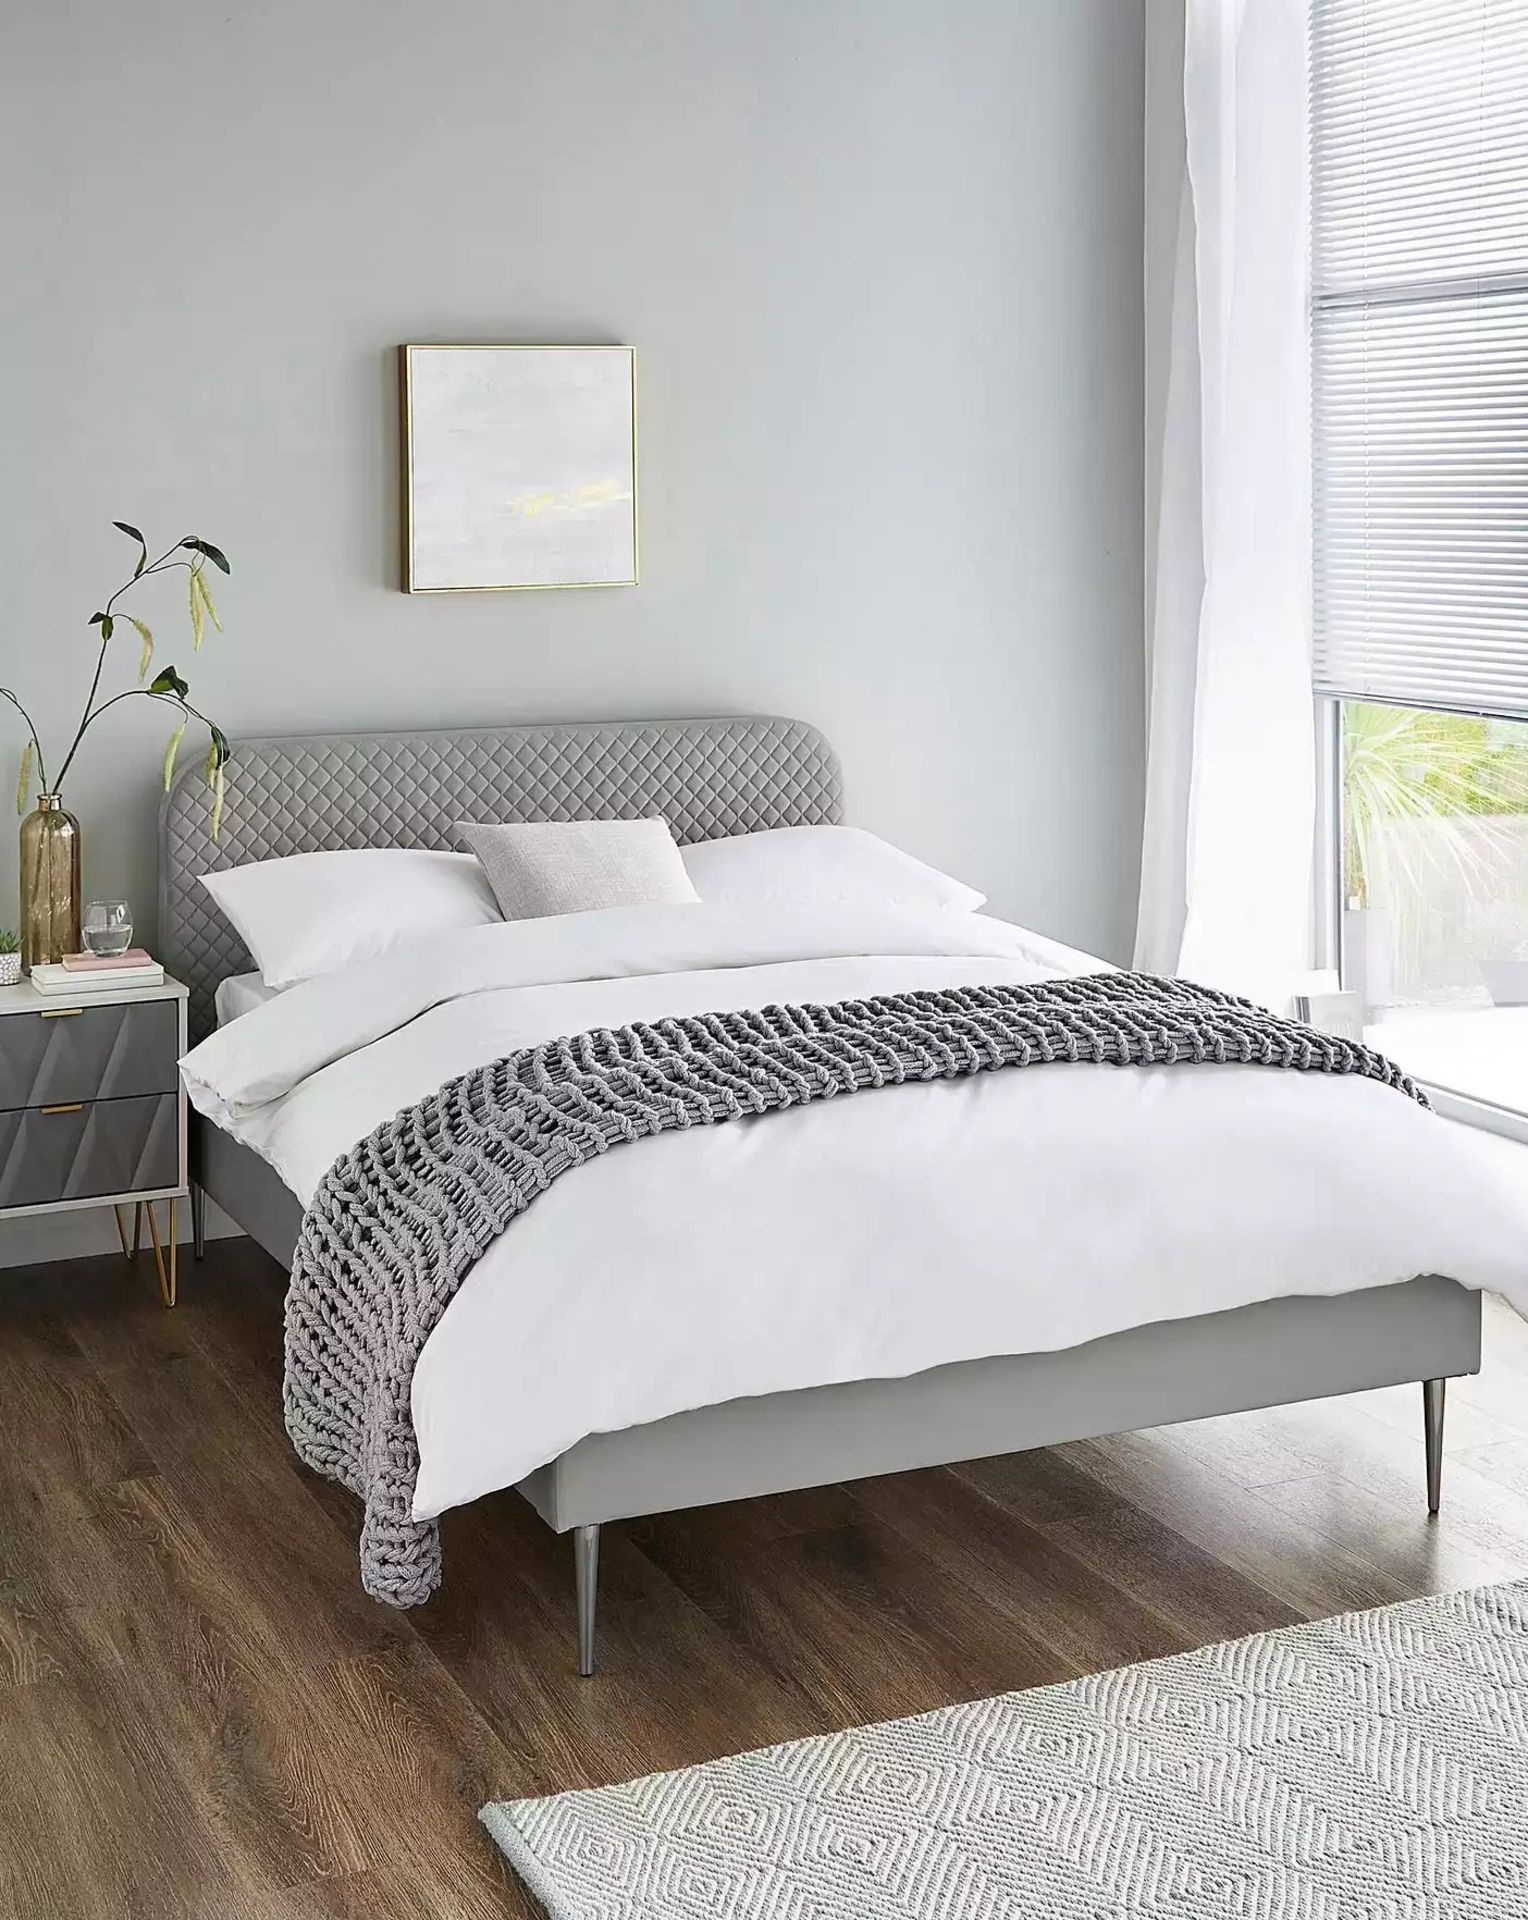 BRAND NEW ARDEN Quilted KING Bed Frame. PEWTER. RRP £489 EACH. The Arden Quilted Bed is the - Image 3 of 3